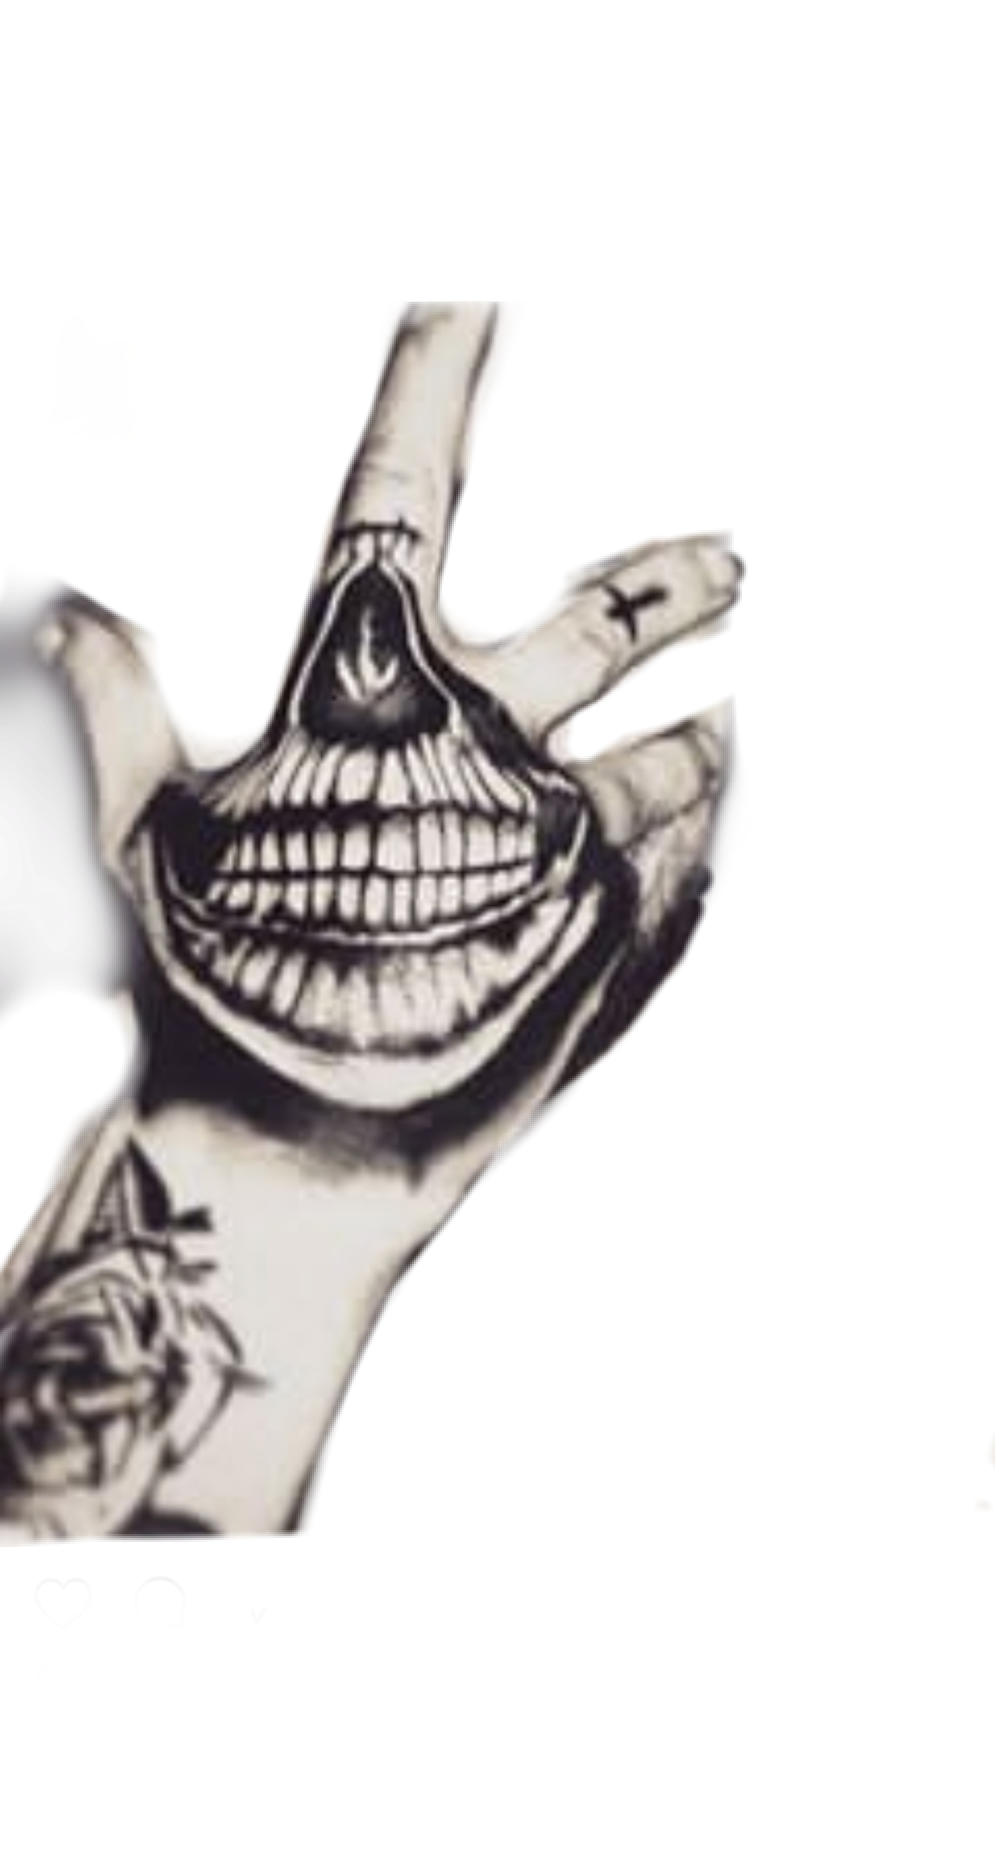 This visual is about freetoedit joker hand smile laugh #joker #hand #smile...